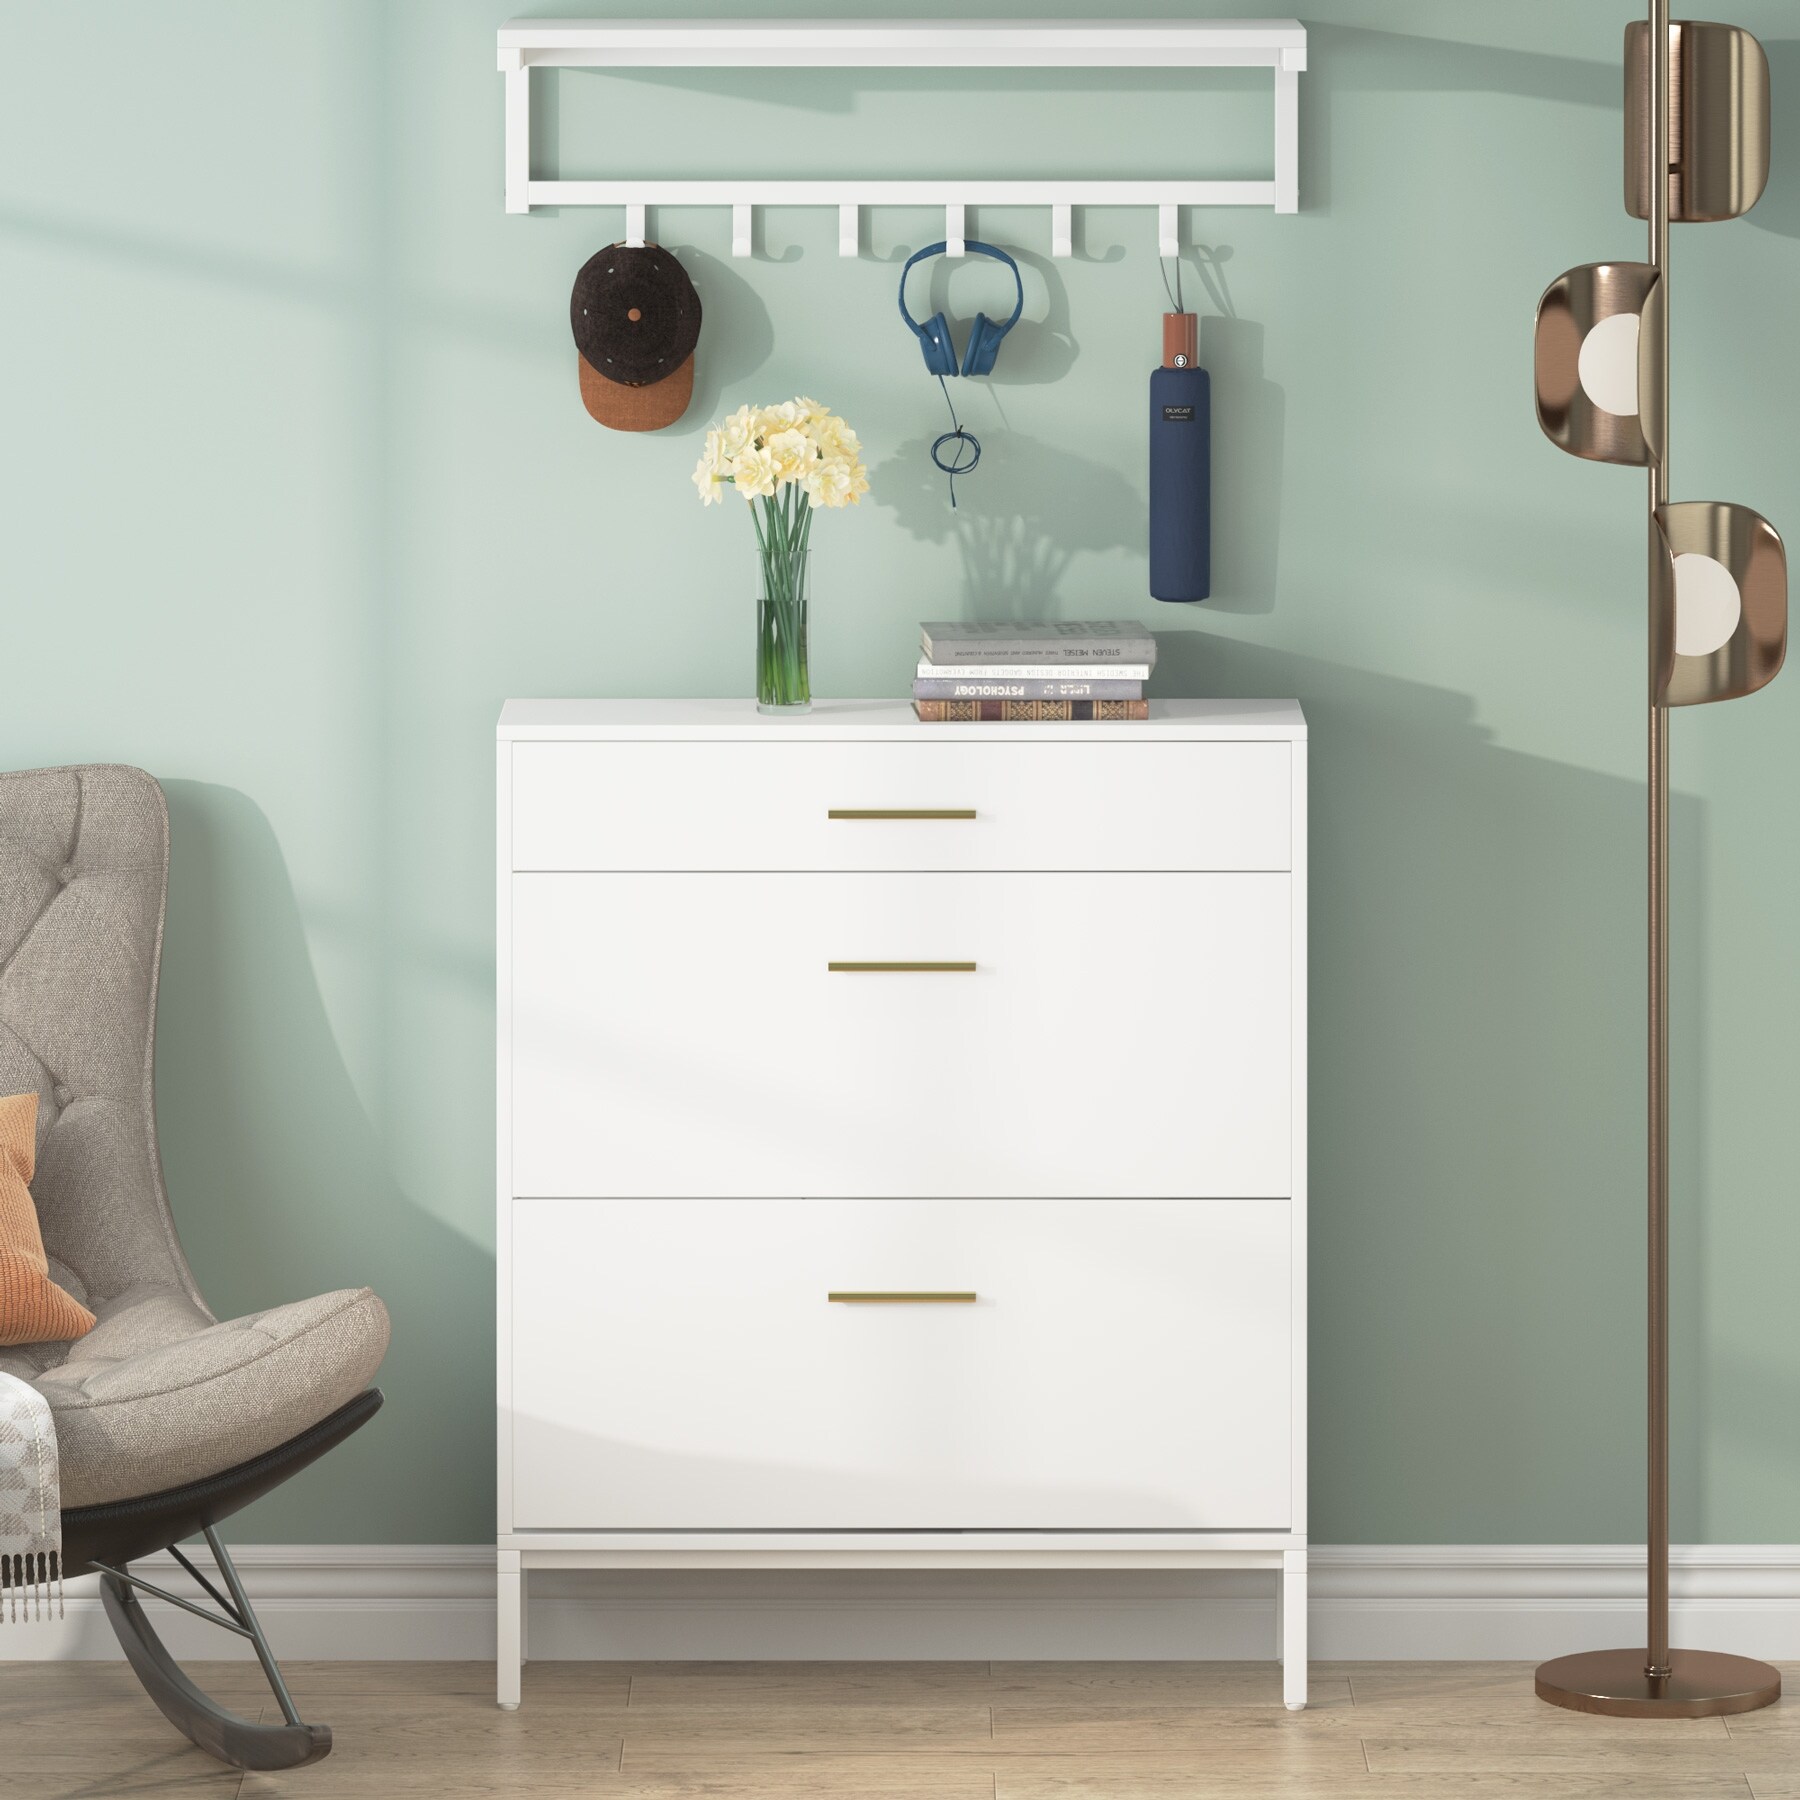 https://ak1.ostkcdn.com/images/products/is/images/direct/757c4bb9f27a6867e5661e6974126e01a869bb8c/White-Flip-Drawer-Shoe-Cabinet-%26-Wall-Mounted-Coat-Rack-Set%2C-3-Drawers-Narrow-Shoe-Storage-Organizer.jpg